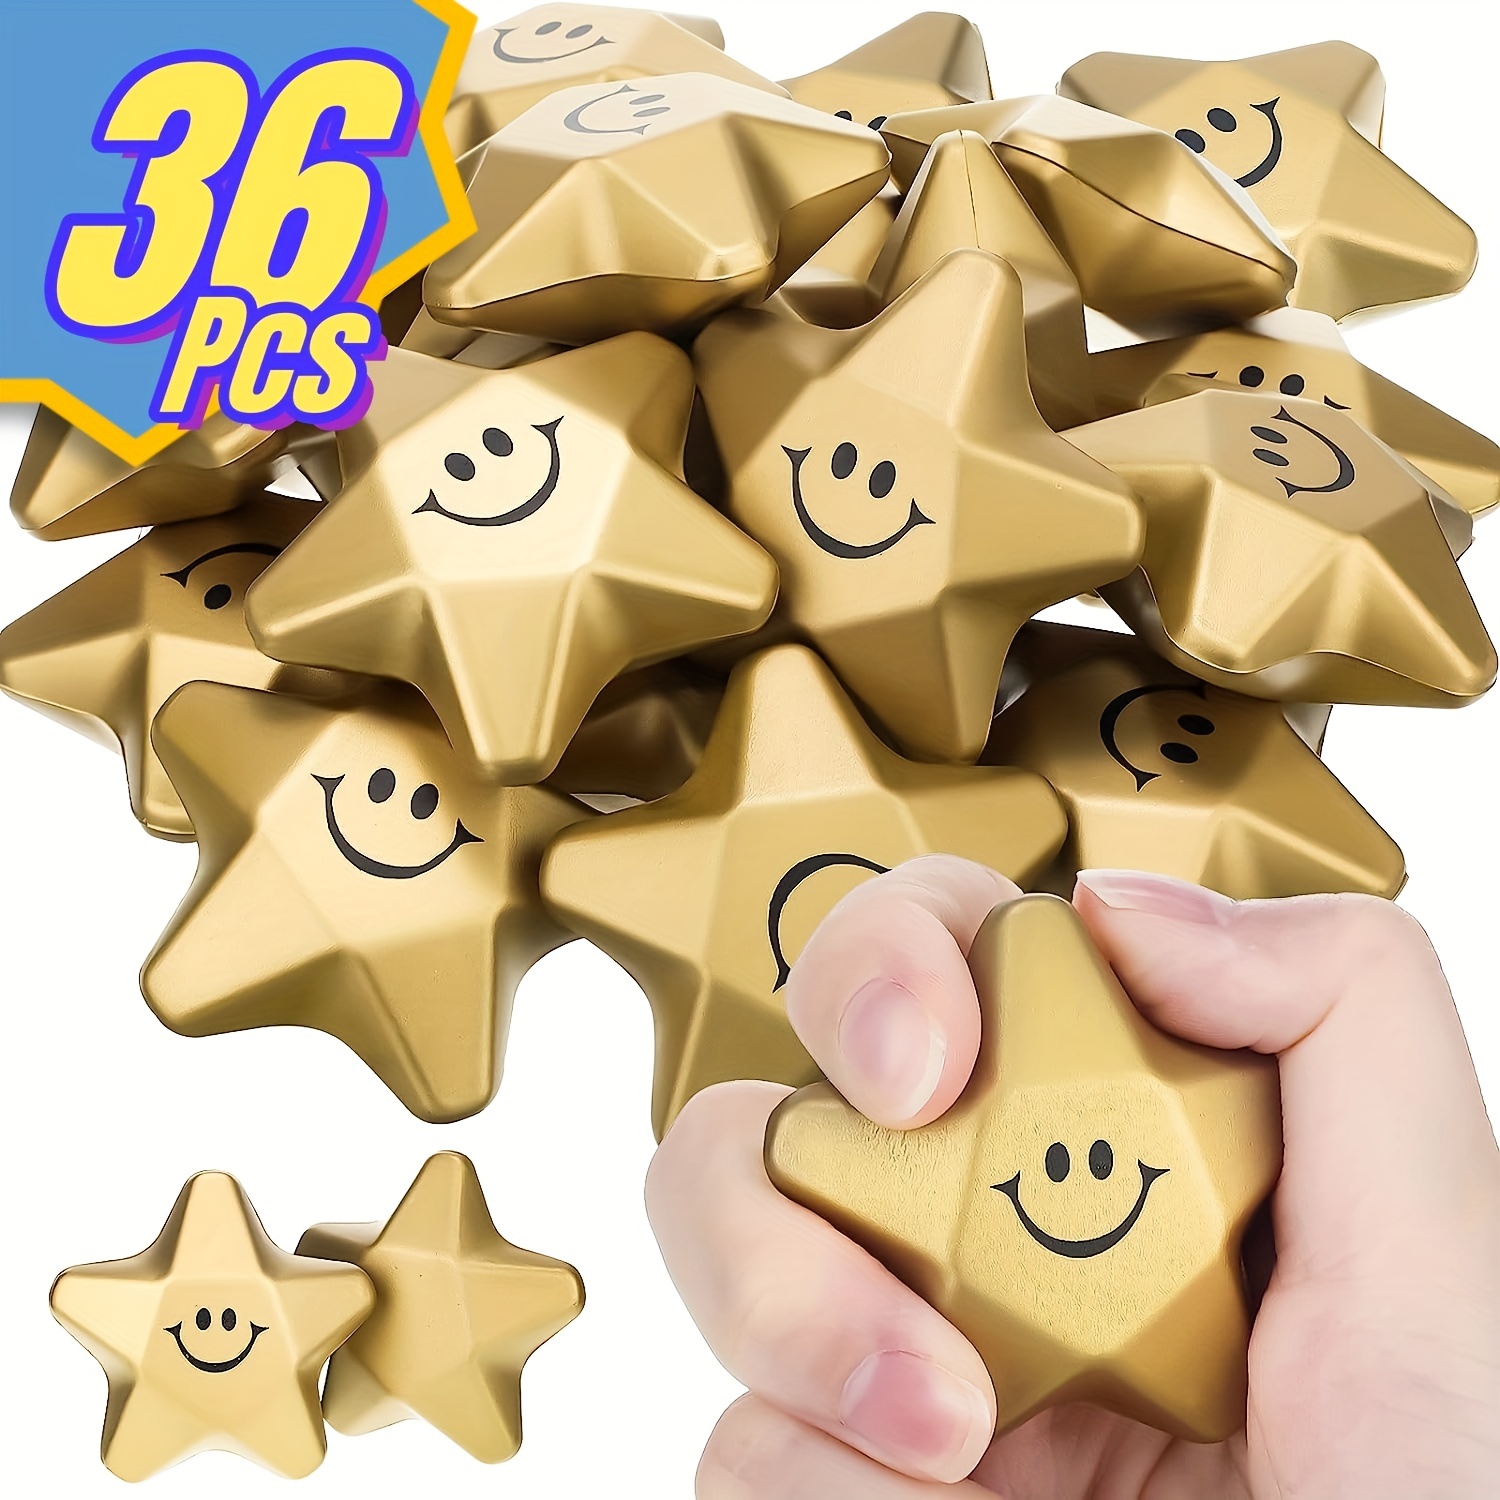 150 Pieces Smile Face Stress Balls 3 Styles Smile Foam Balls Smile Face  Stress Relief Smile Face Balls Stress Toys Party Favors for Teens Adults